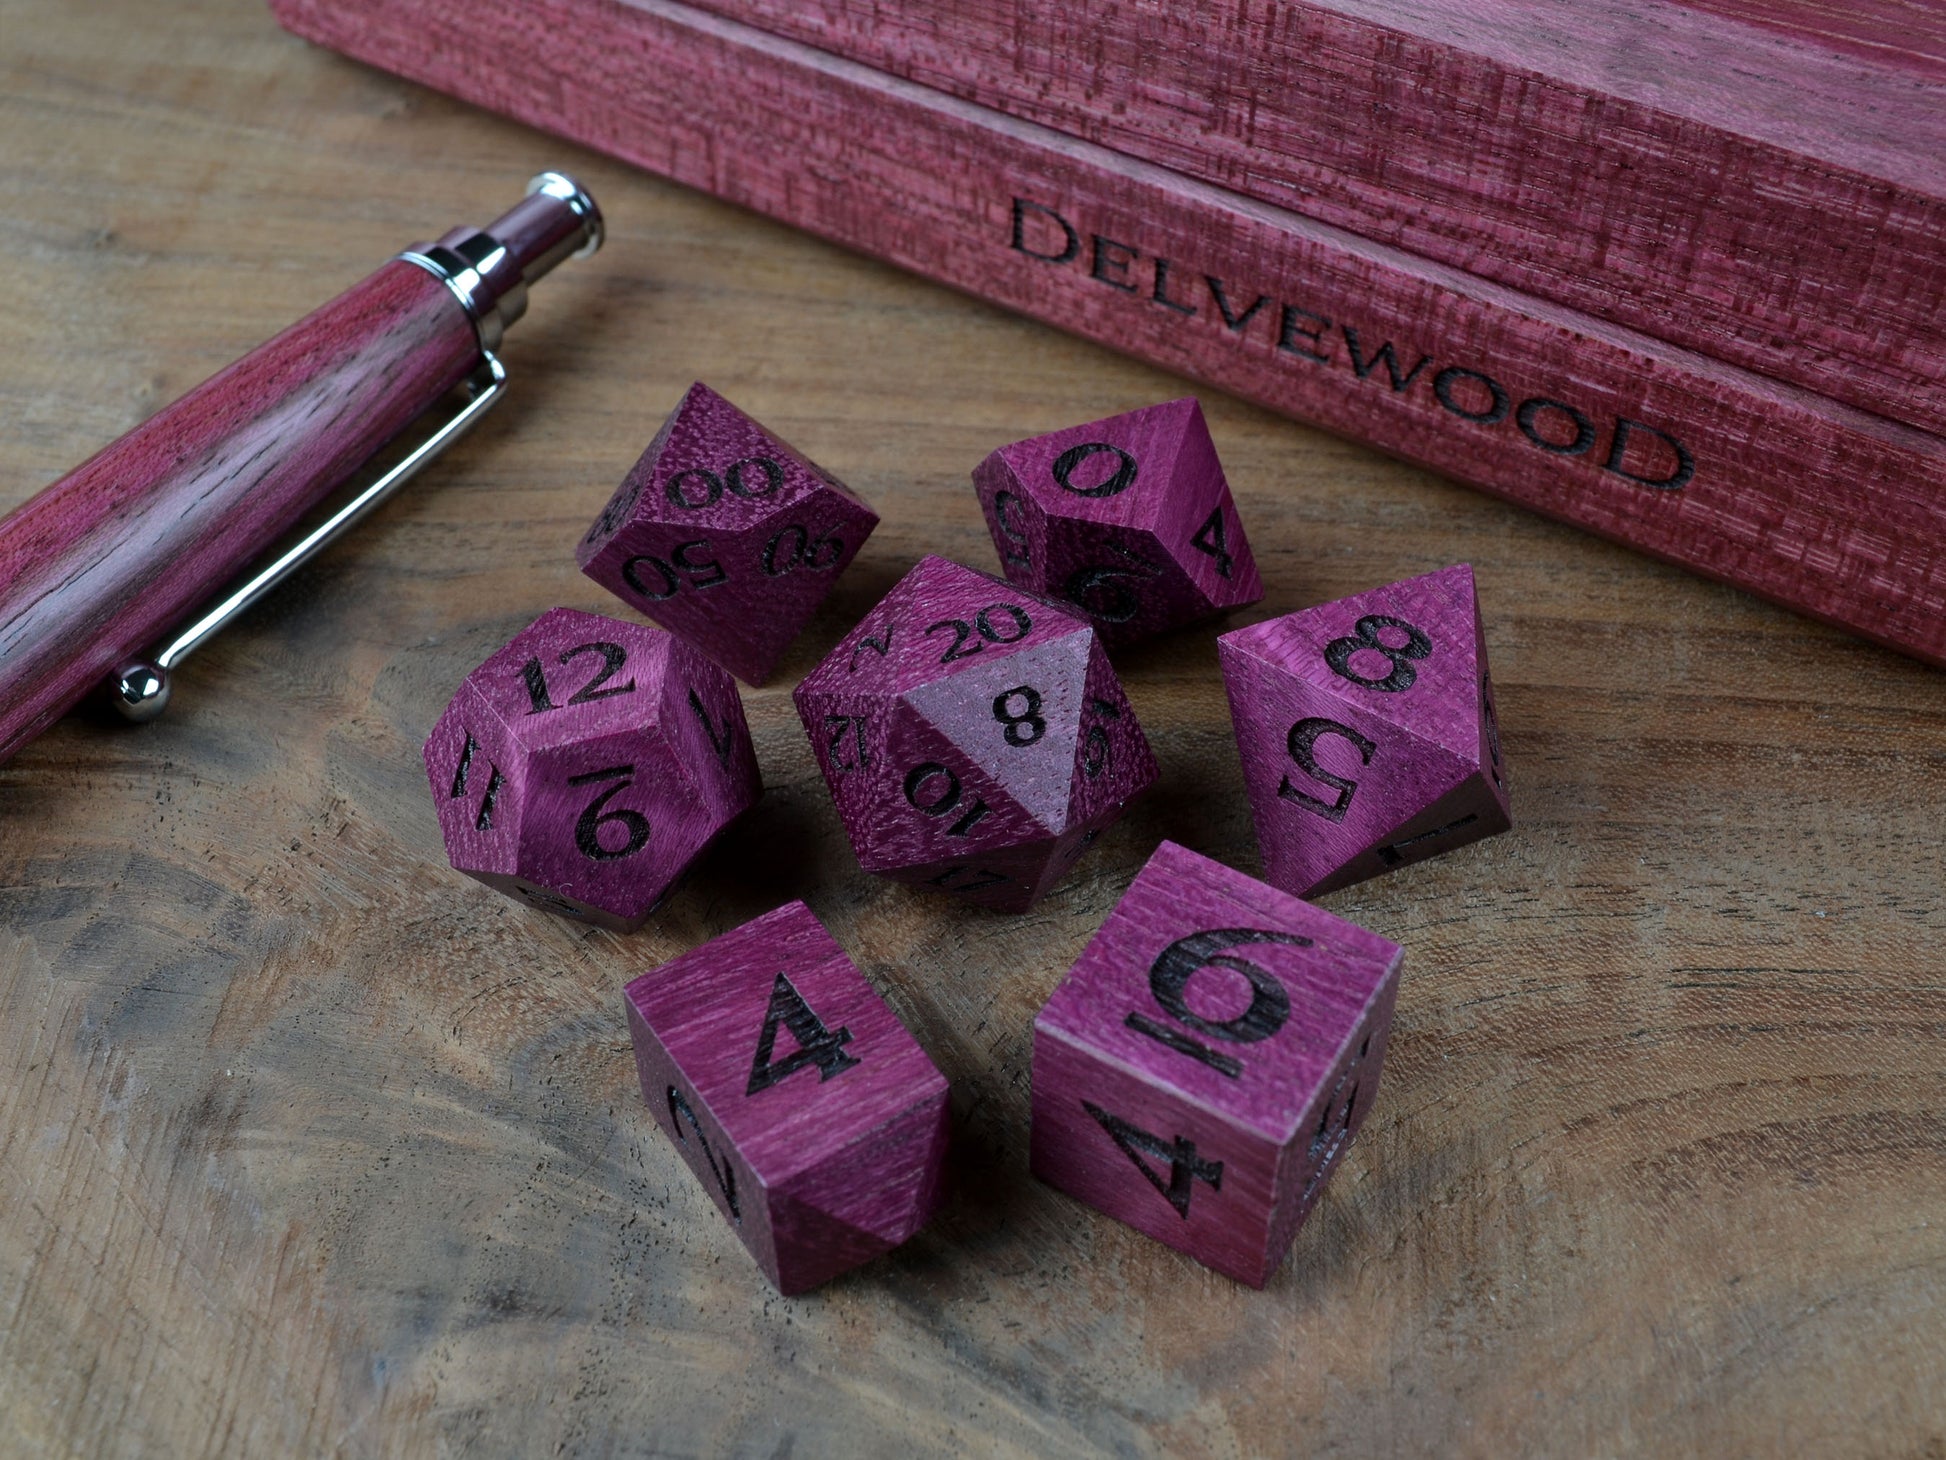 Purpleheart wooden dice set for dungeons and dragons rpg